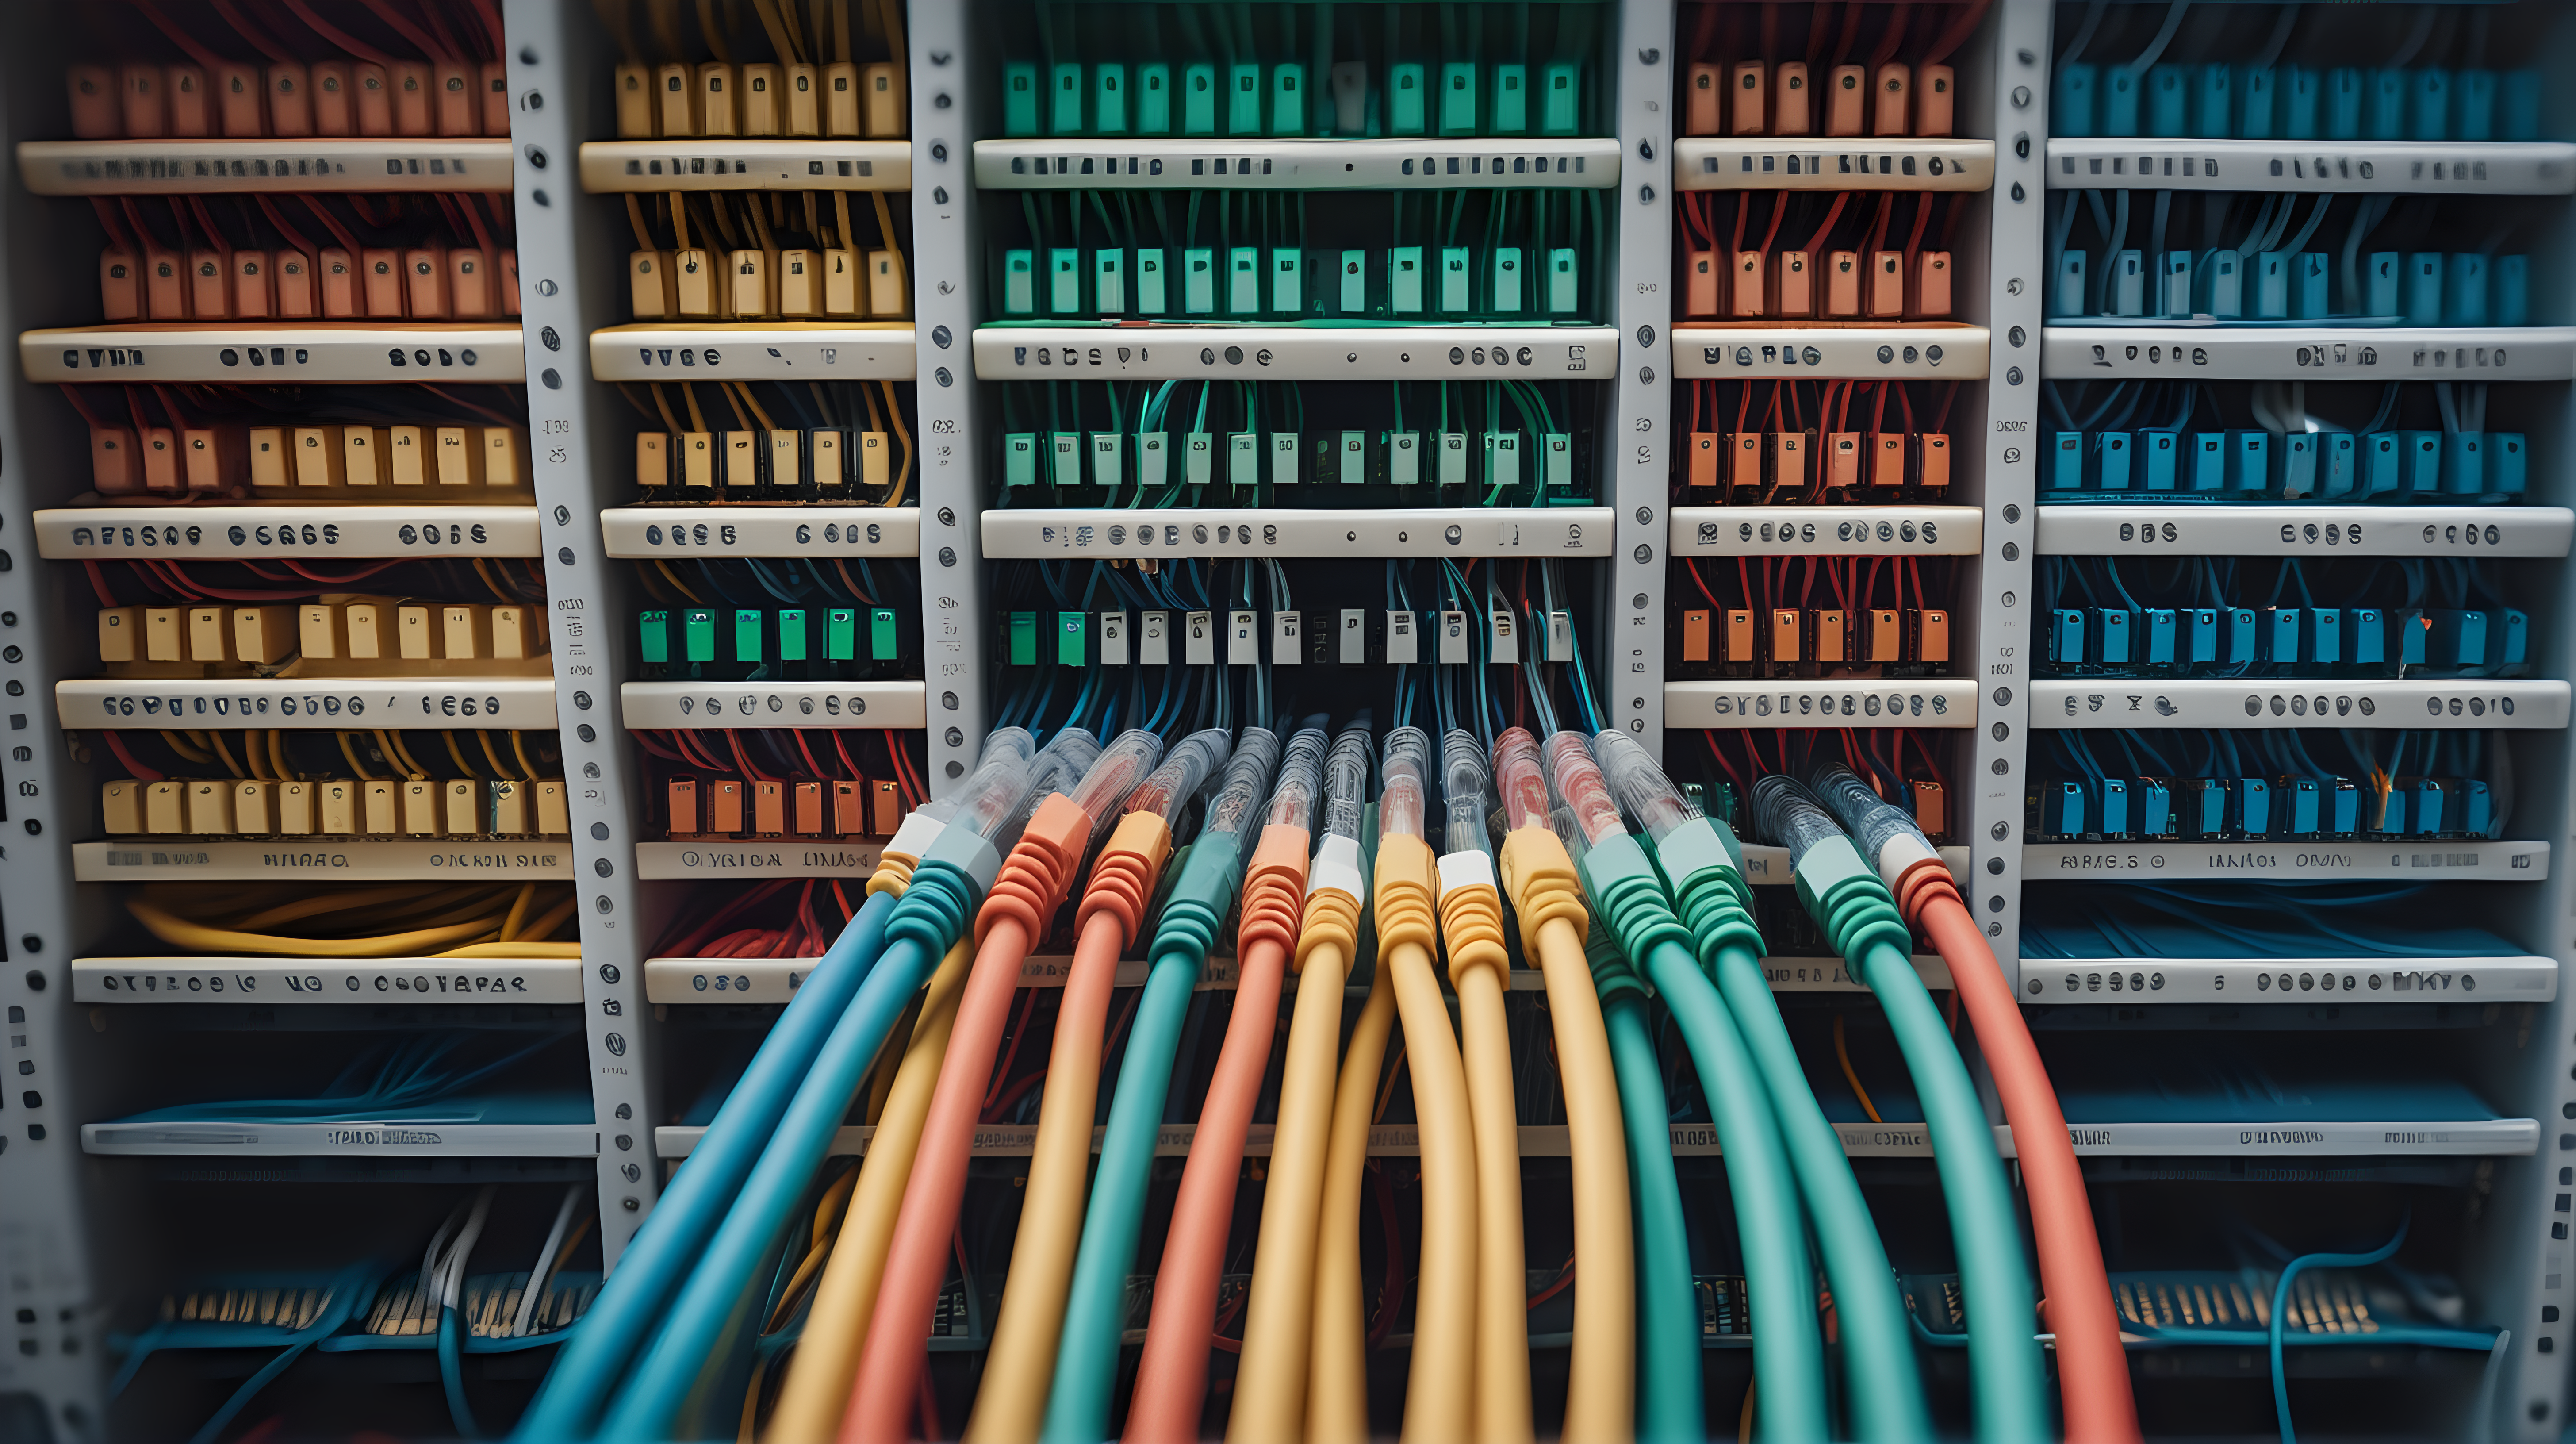 high quality close-up photograph of many data center network cables of various colors in the style of a wes anderson movie
